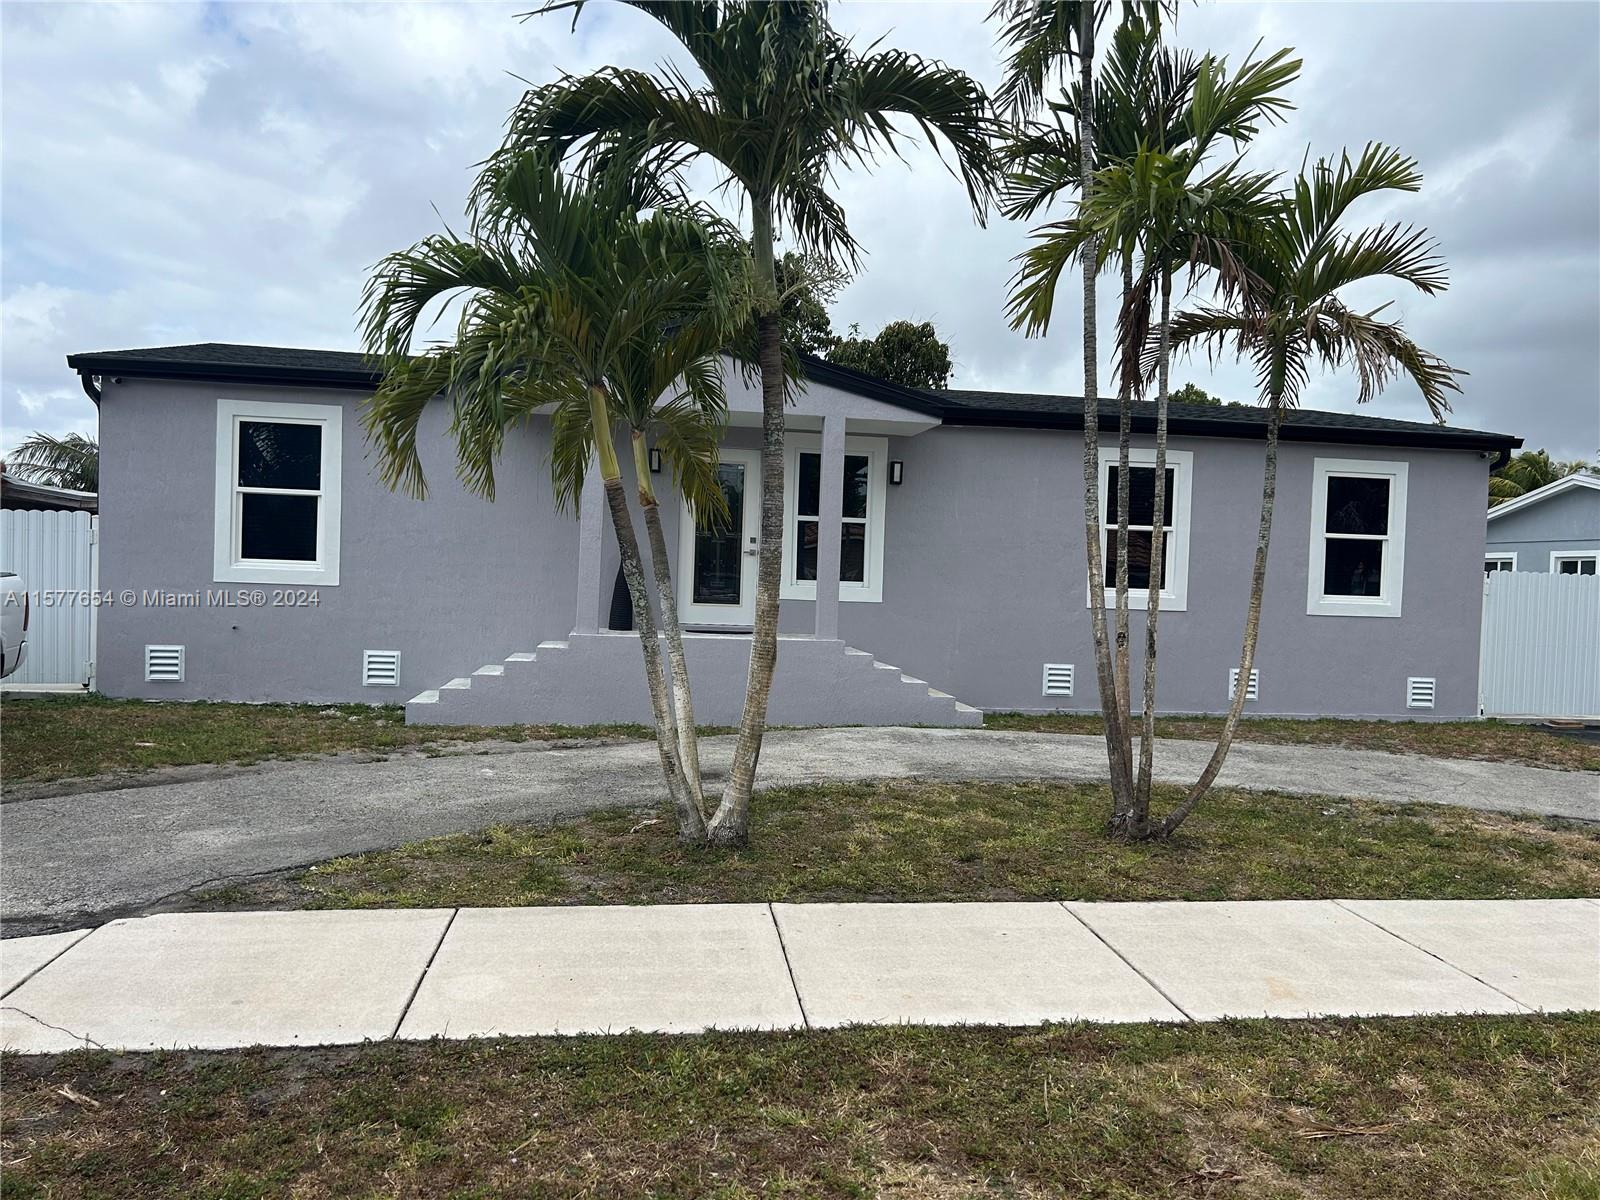 Property for Sale at 16900 Nw 52nd Ave, Miami Gardens, Broward County, Florida - Bedrooms: 4 
Bathrooms: 2  - $619,000